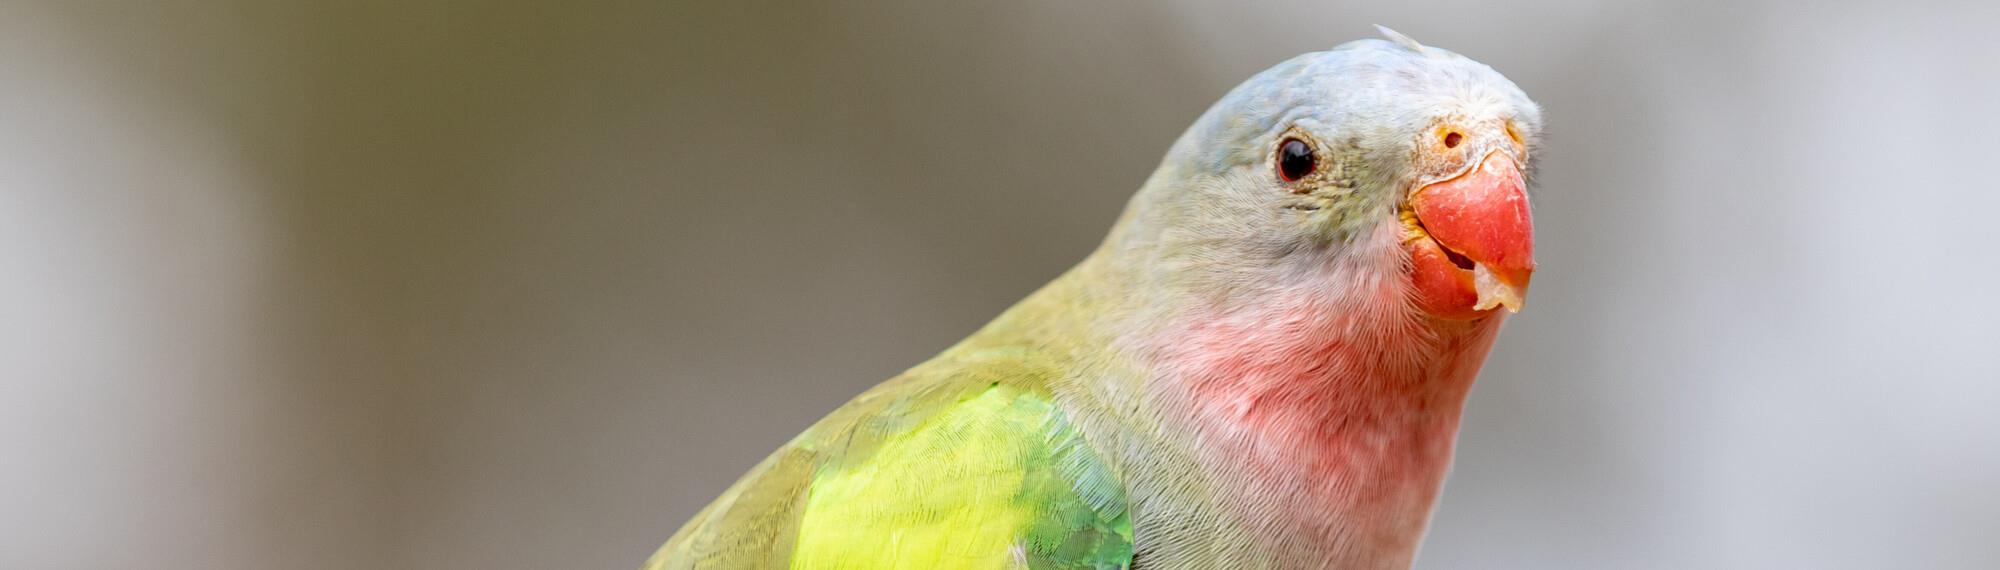 A close-up of a Princess Parrot, facing right and eating fruit.